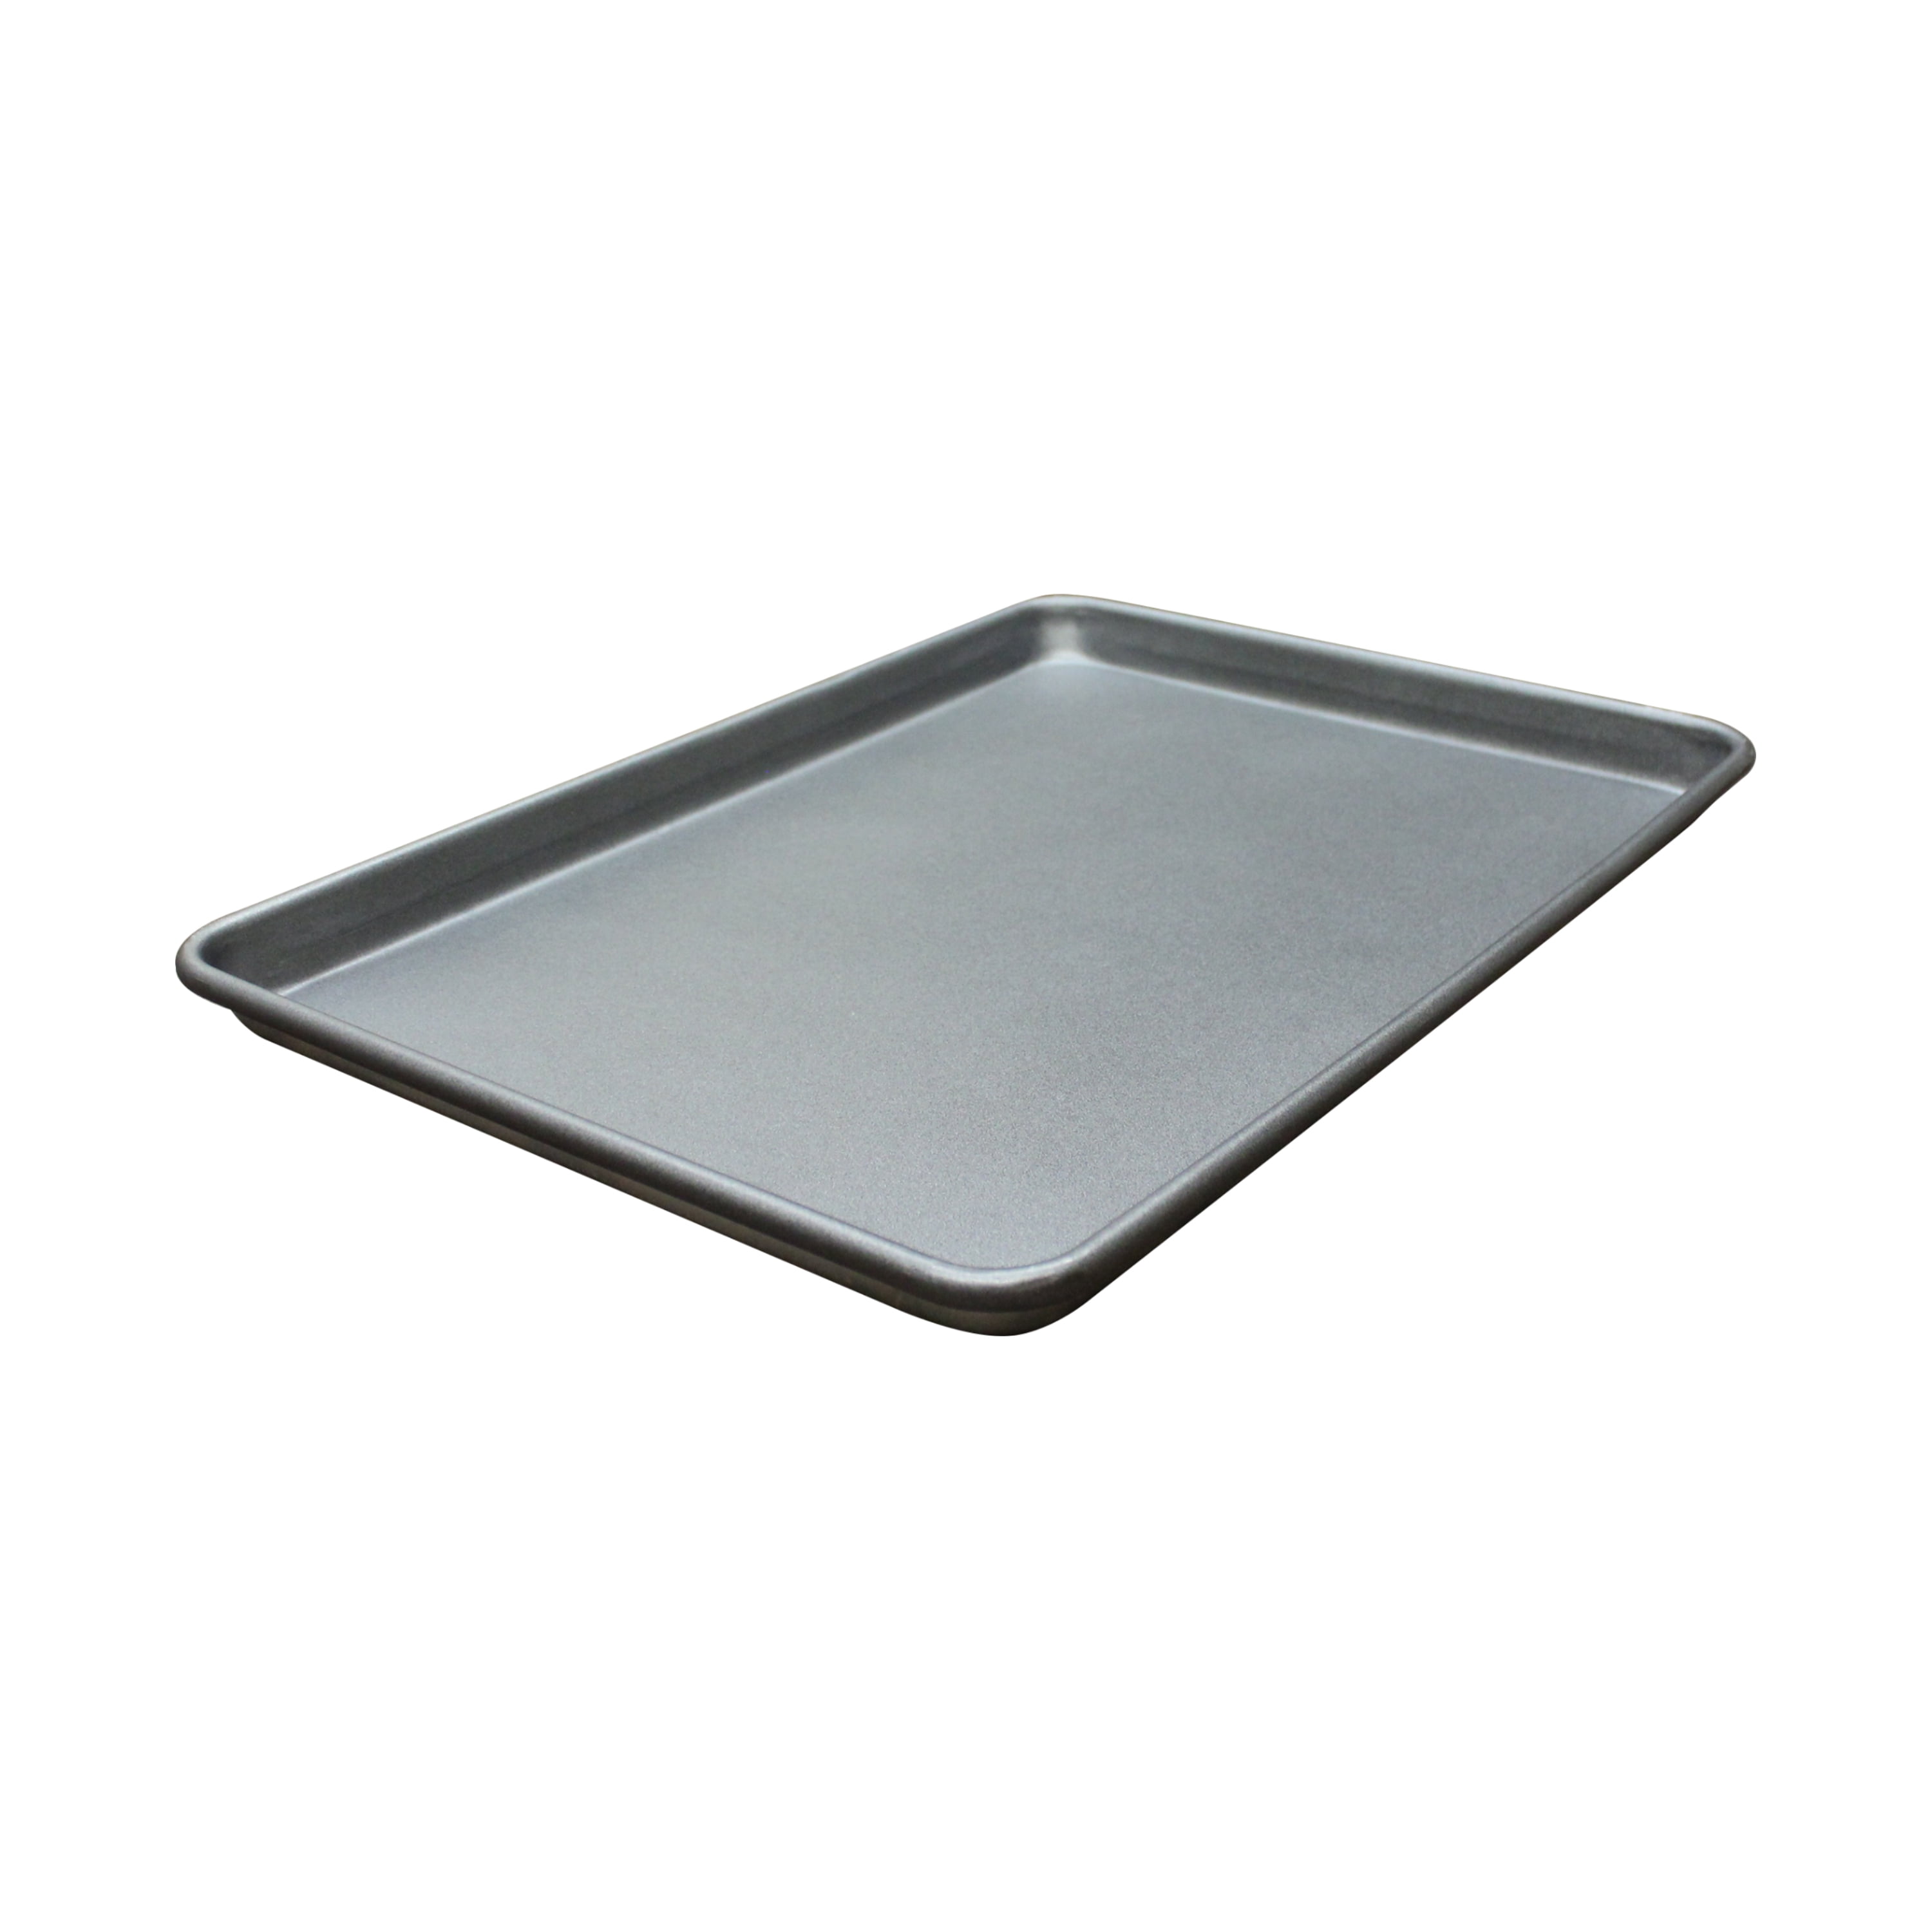 12 Pans 18 x 26 Inch Commercial Aluminum Cookie Sheets by GRIDMANN